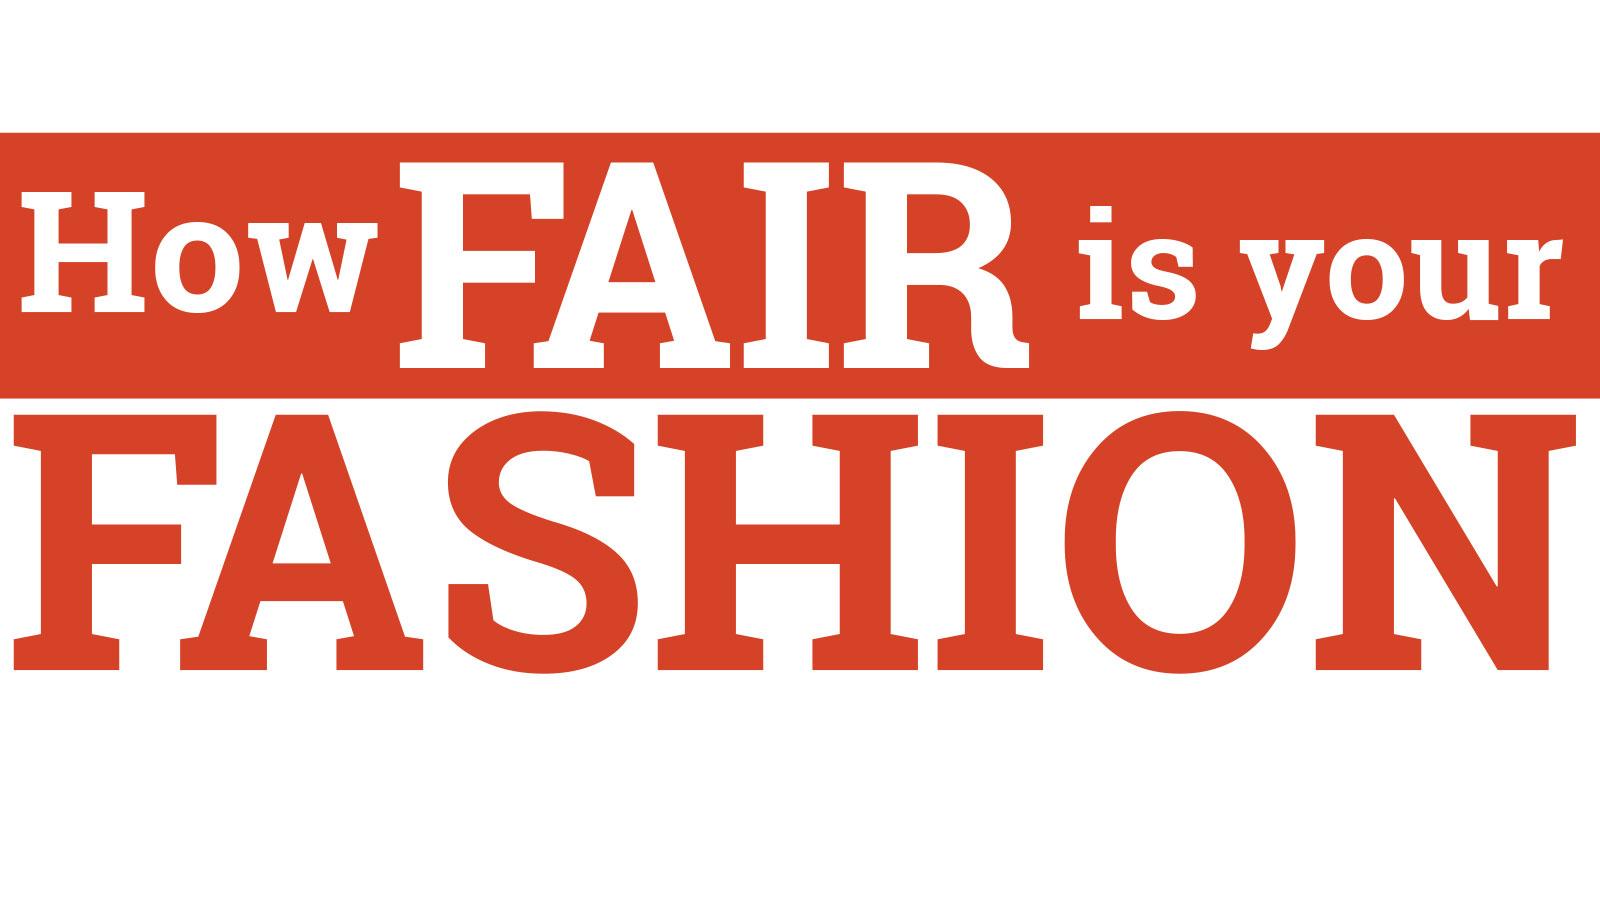 This logo says 'How fair is your fashion' in red letters